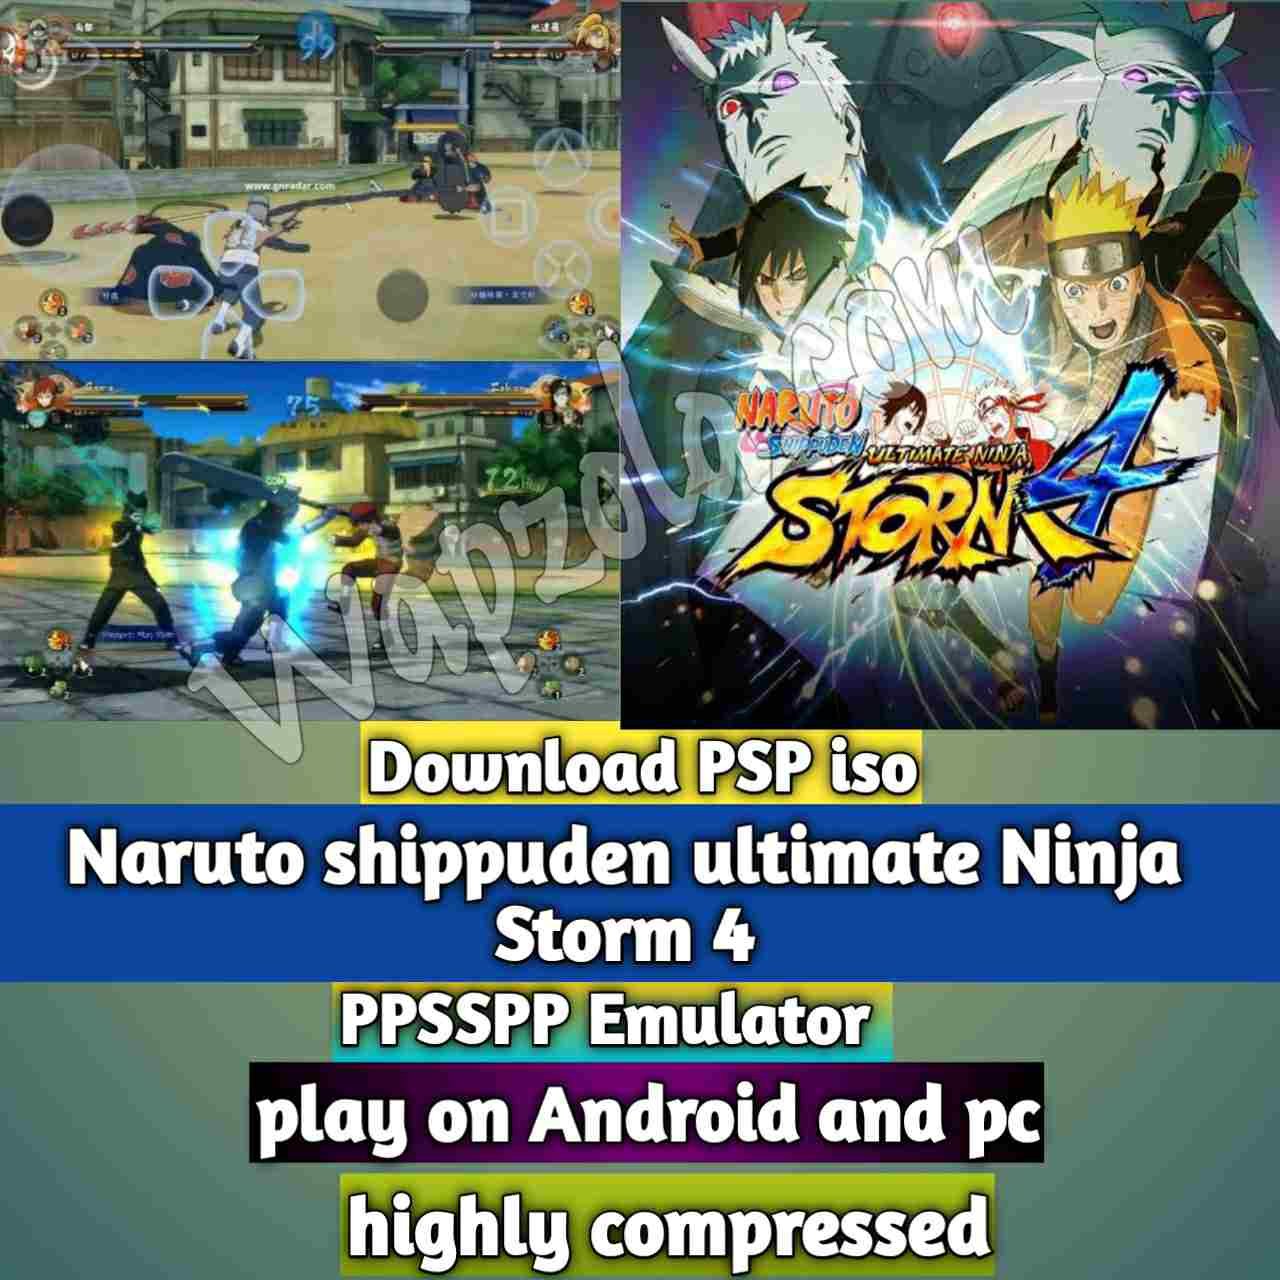 You are currently viewing [Download] Naruto shippuden ultimate Ninja Storm 4 Mod iso ppsspp emulator – PSP APK Iso Rom highly compressed 800MB